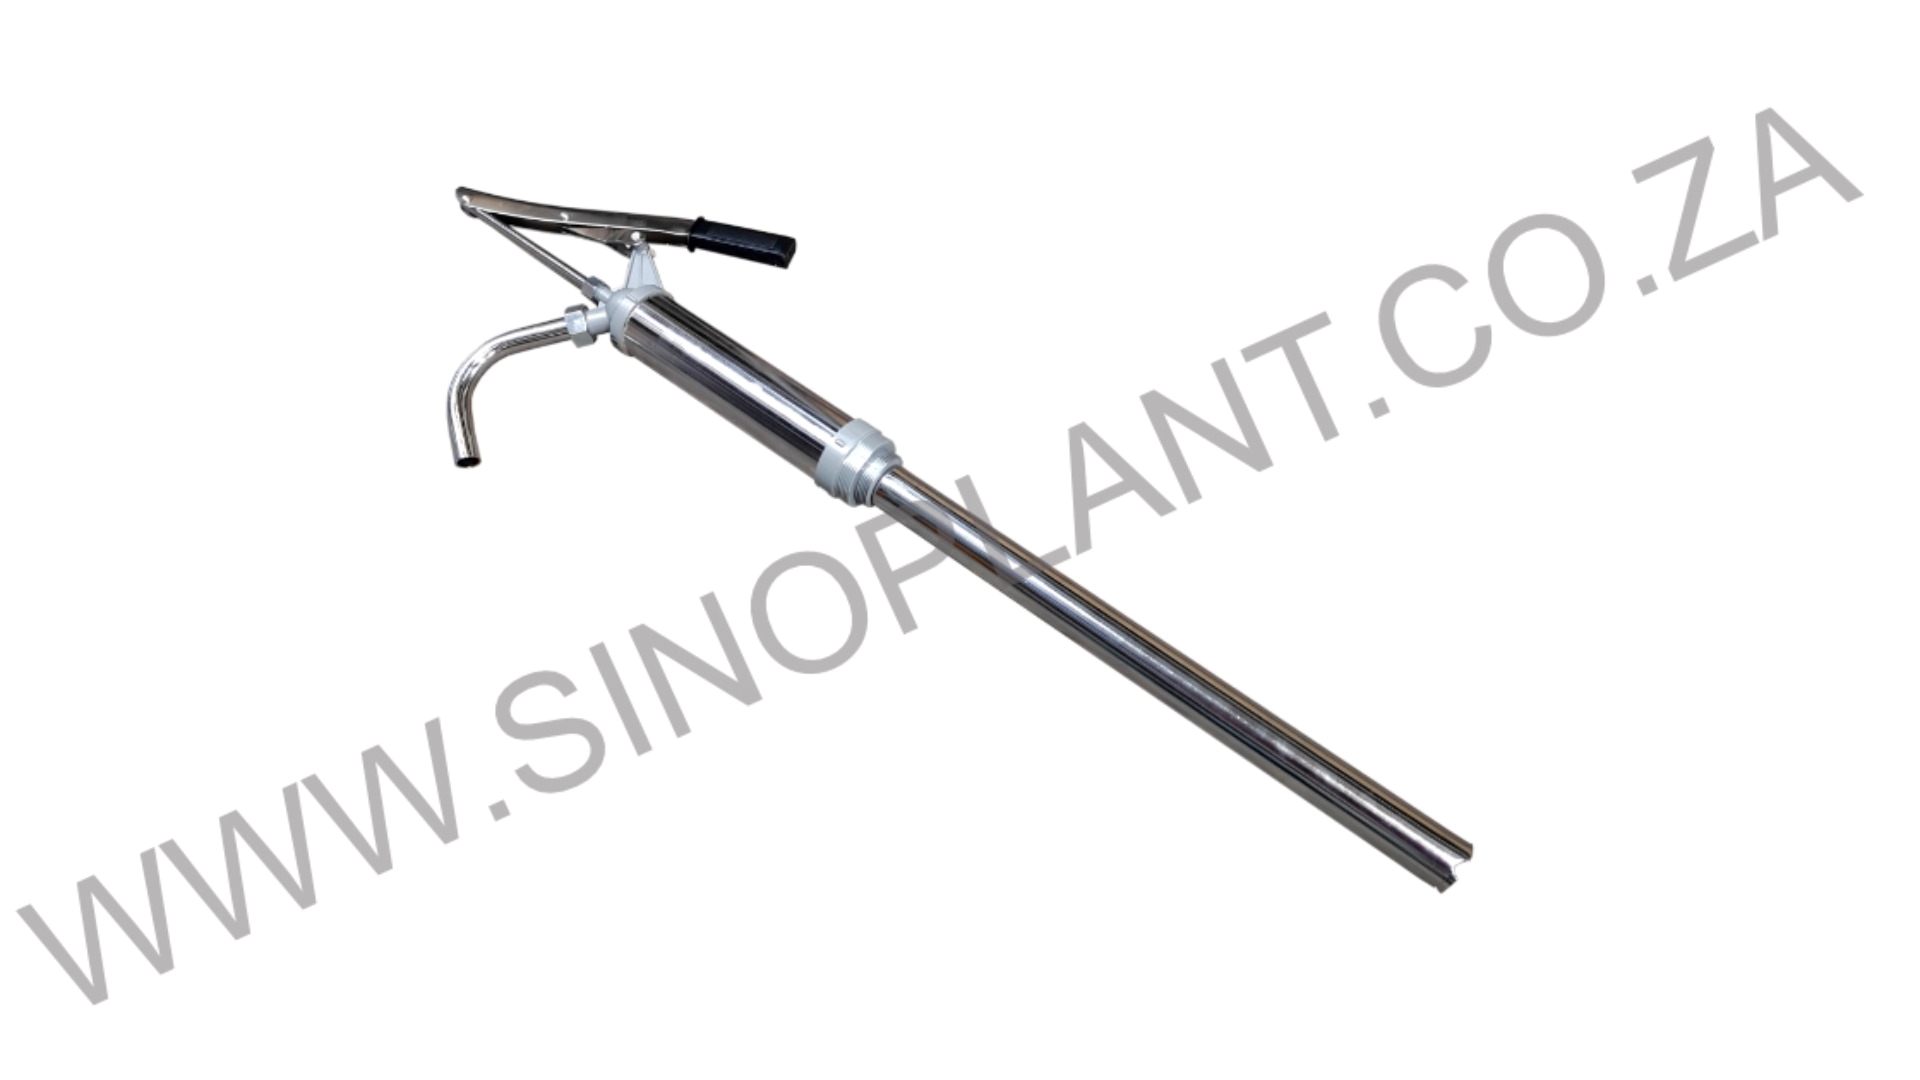 Sino Plant Fuel pumps New   Manual Lever Drum Pump 2022 for sale by Sino Plant | Truck & Trailer Marketplaces